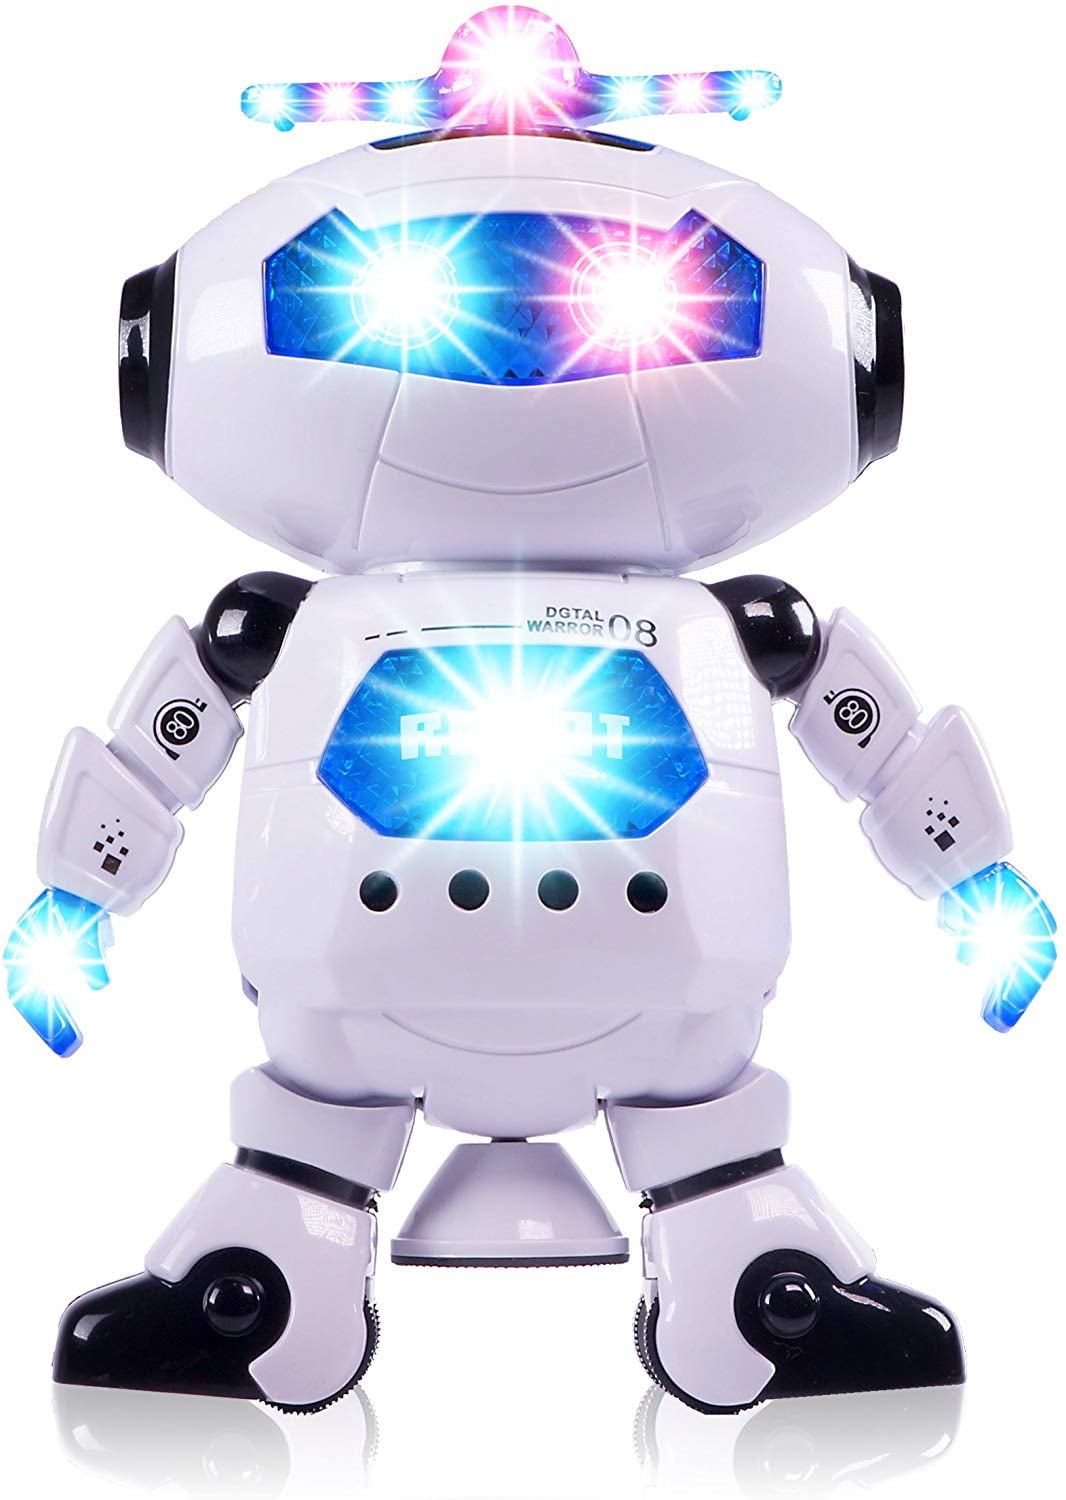 Dancing Robot With Light and Sound Kids Toys Musical Boys Toy Gift xmas Birthday 